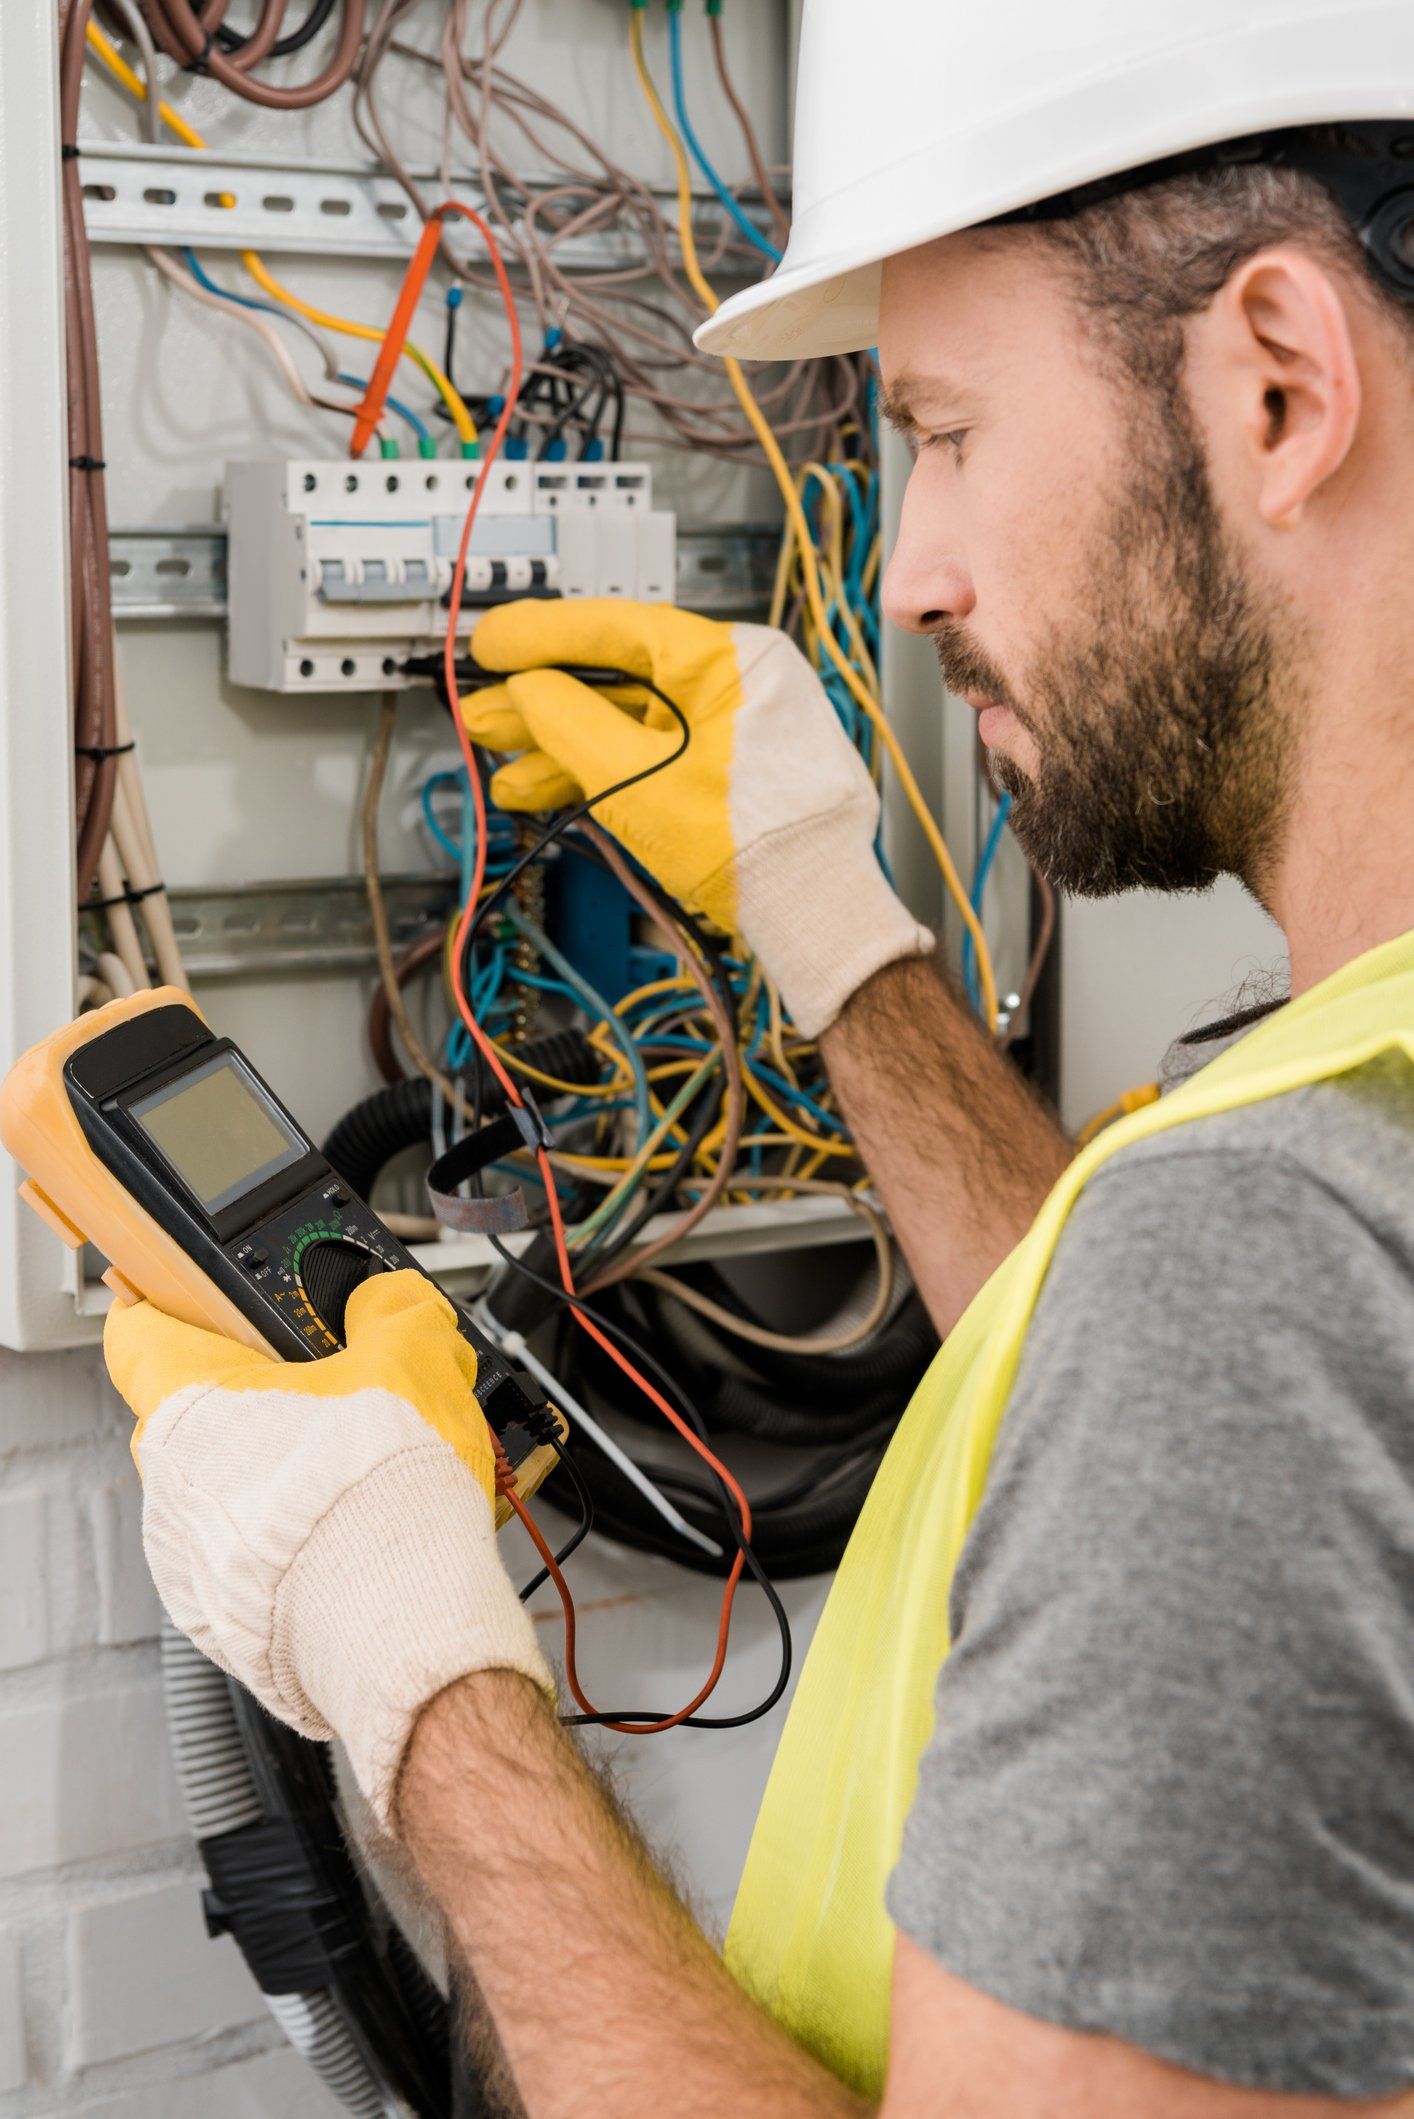 Residential Electrician —  Electrician Checking Electrical Box with Multimeter in Claymont, DE